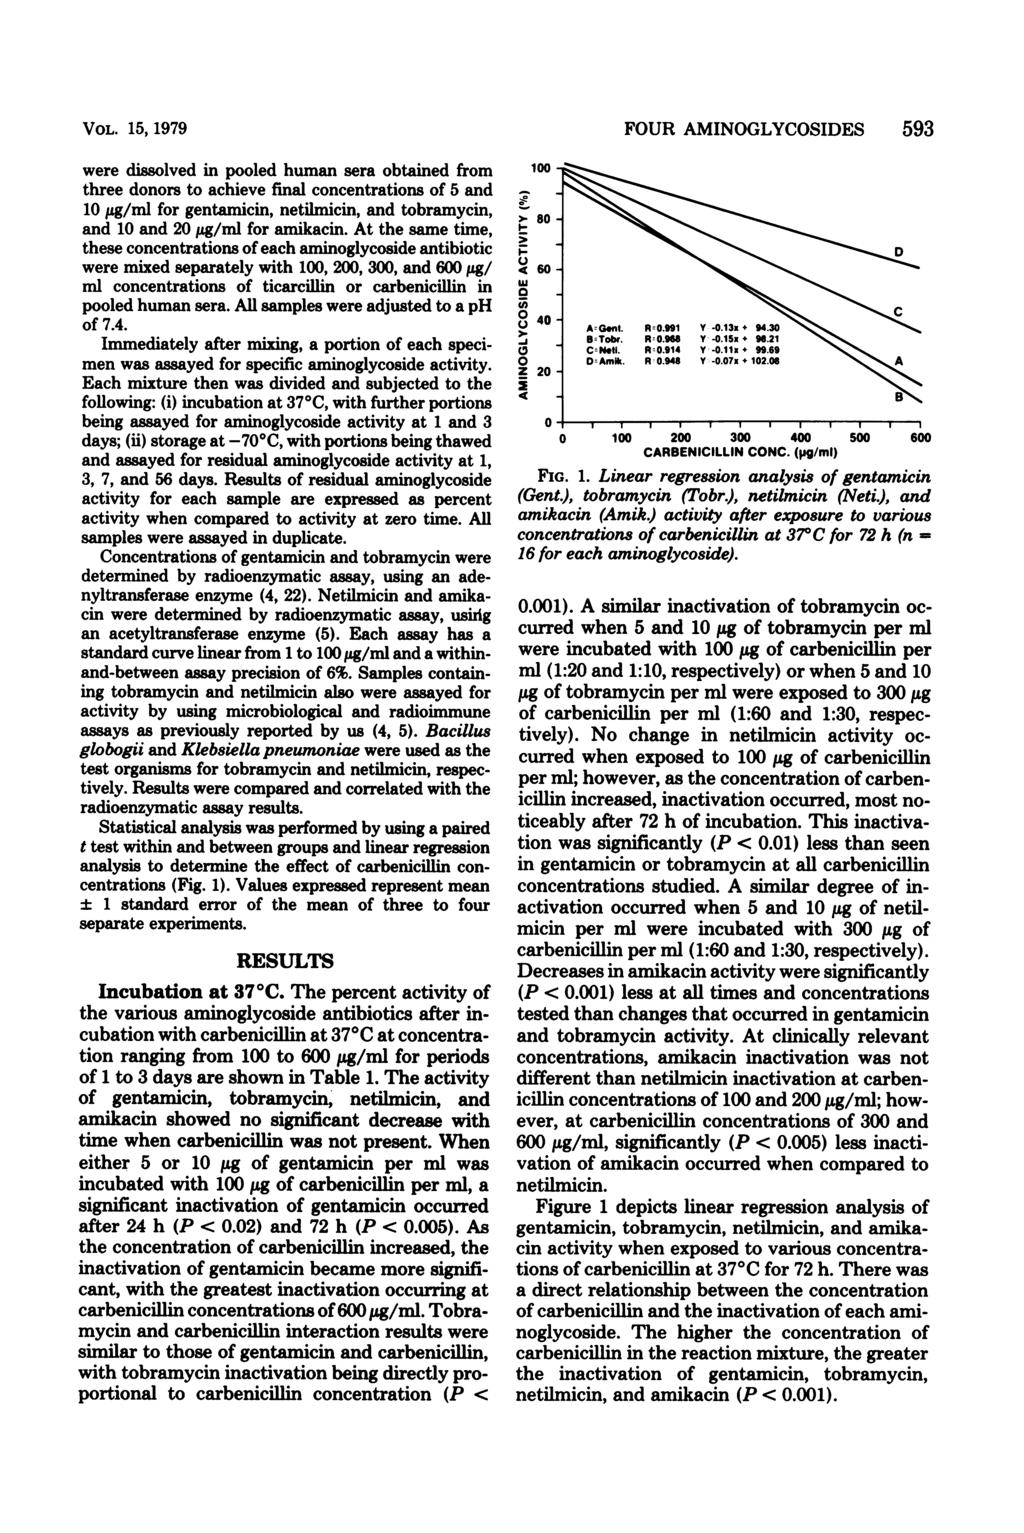 VOL. 15, 1979 were dissolved in pooled humn ser obtined from three donors to chieve finl concentrtions of 5 nd 1 ug/ml for gentmicin, netilmicin, nd tobrmycin, nd 1 nd 2,ug/ml for mikcin.